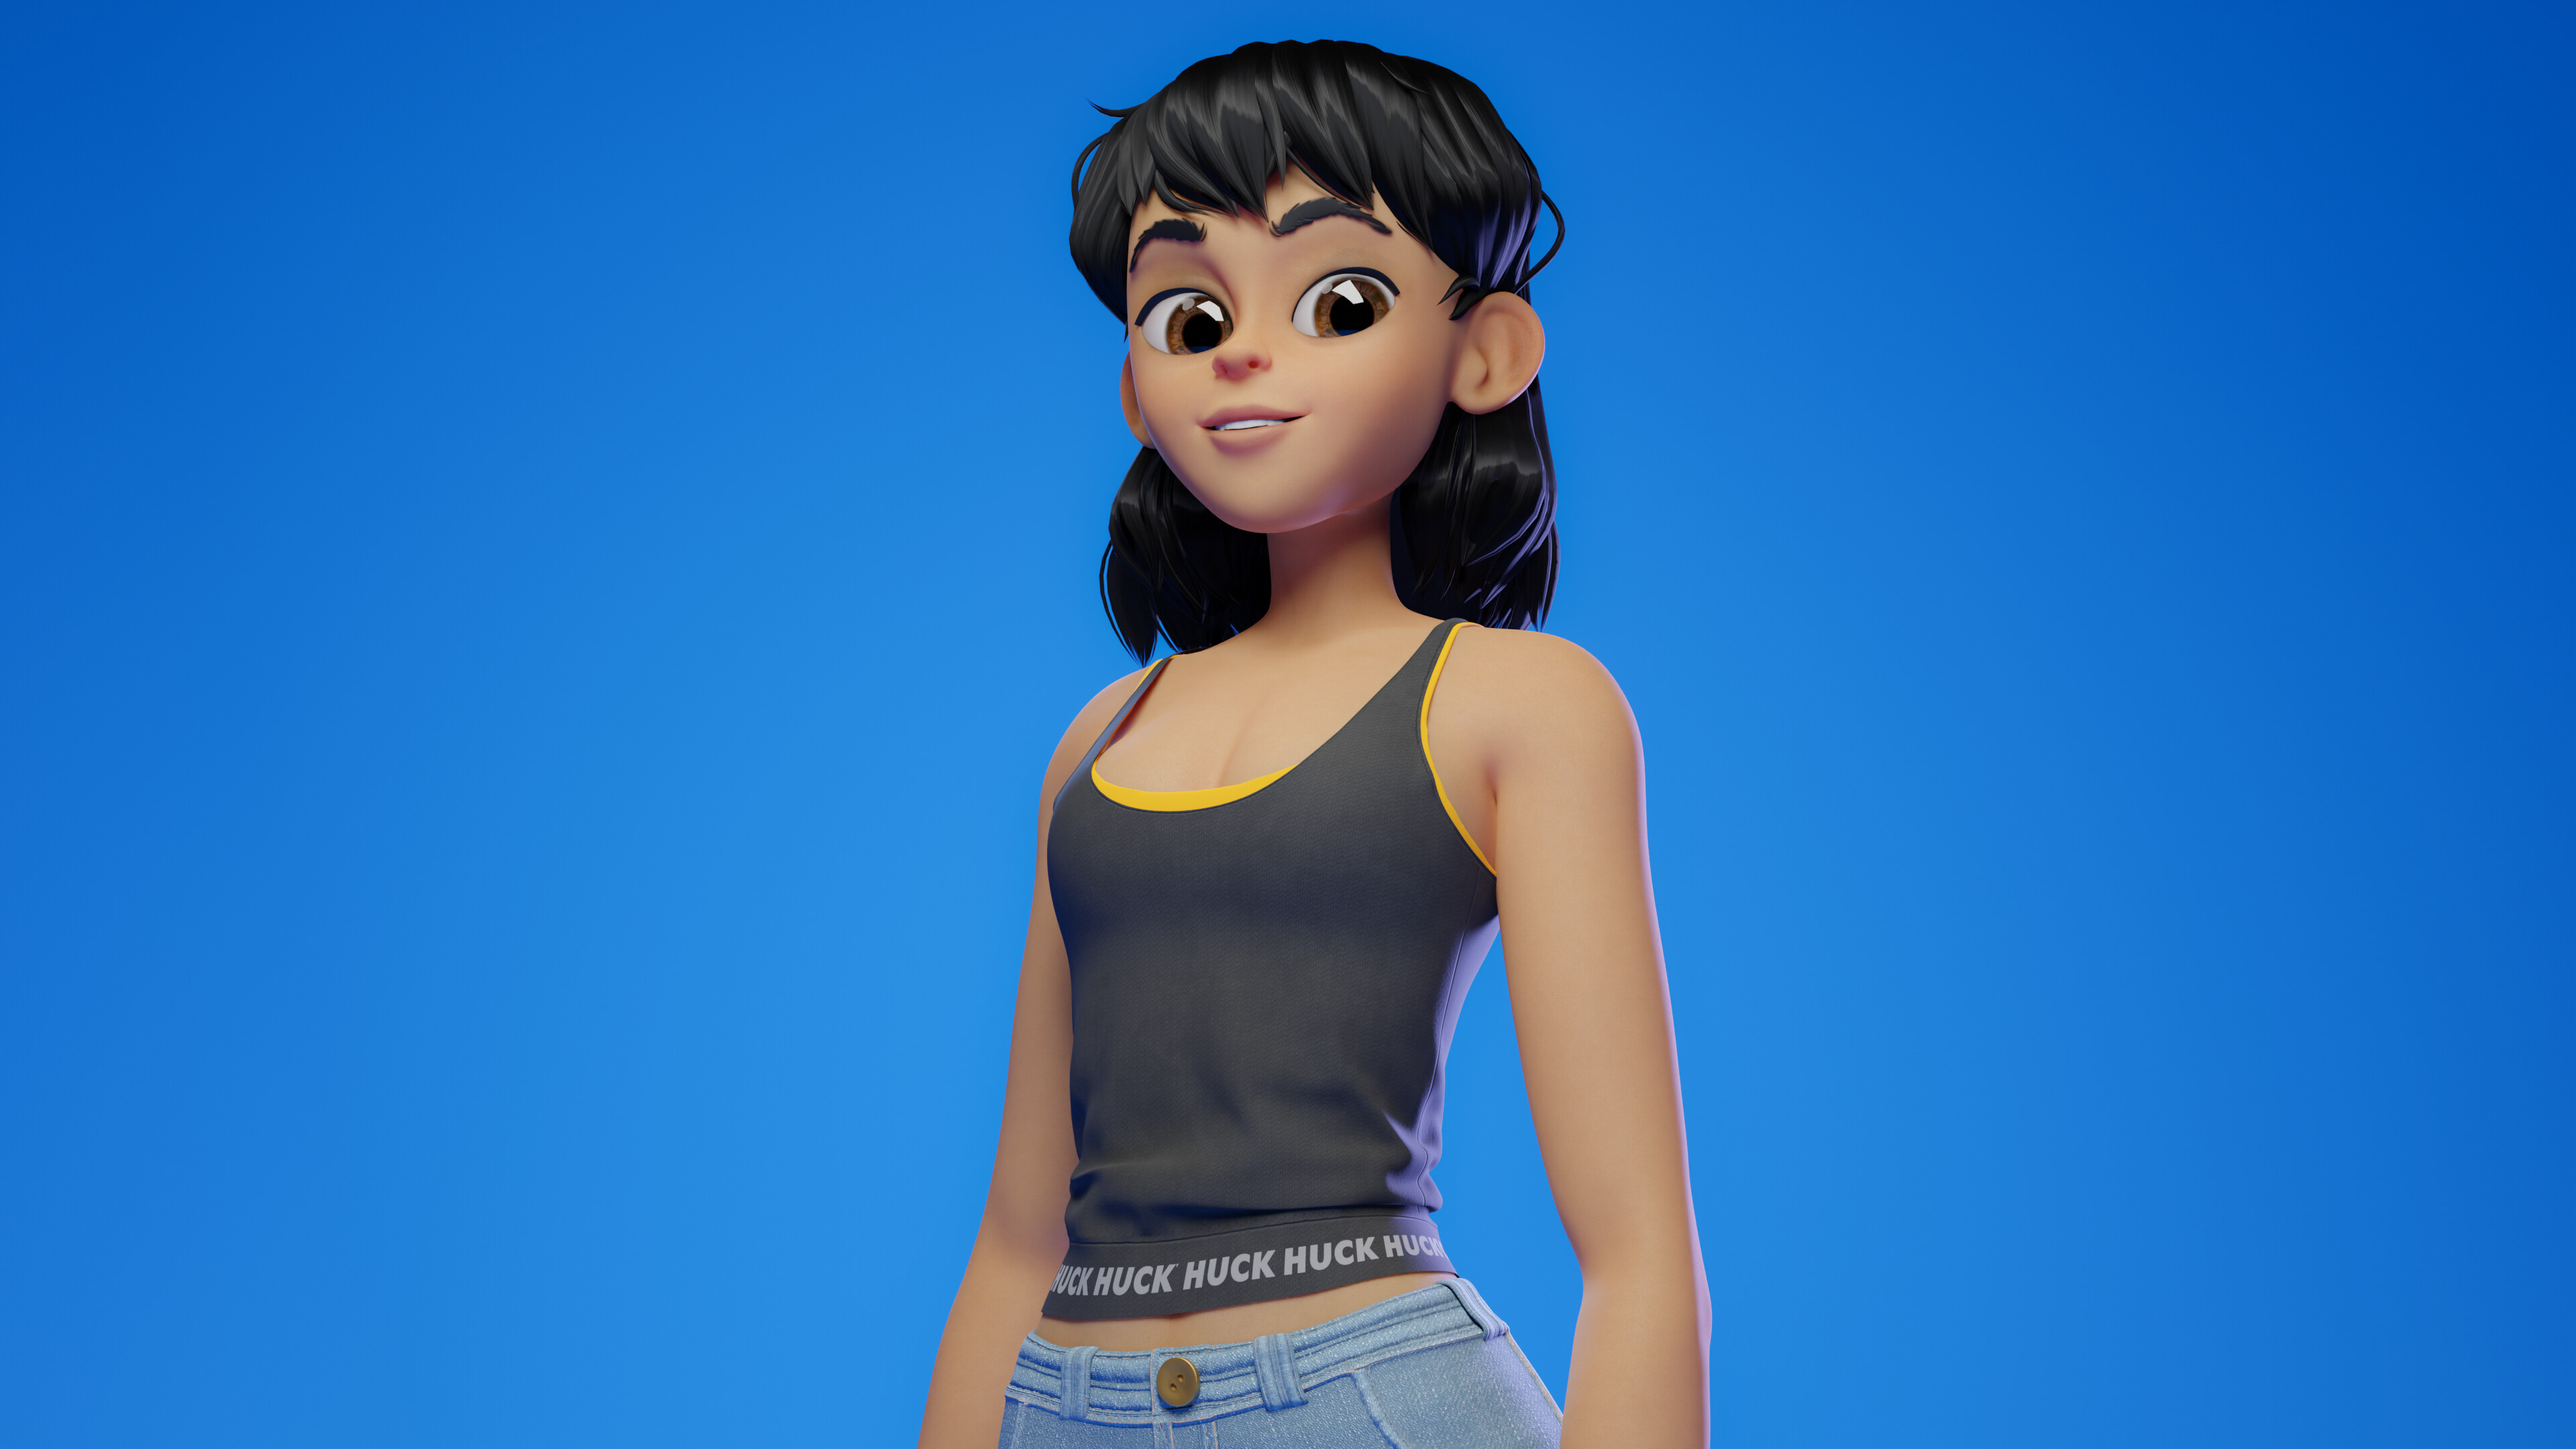 Danny - Rigged Character (free download) - Finished Projects